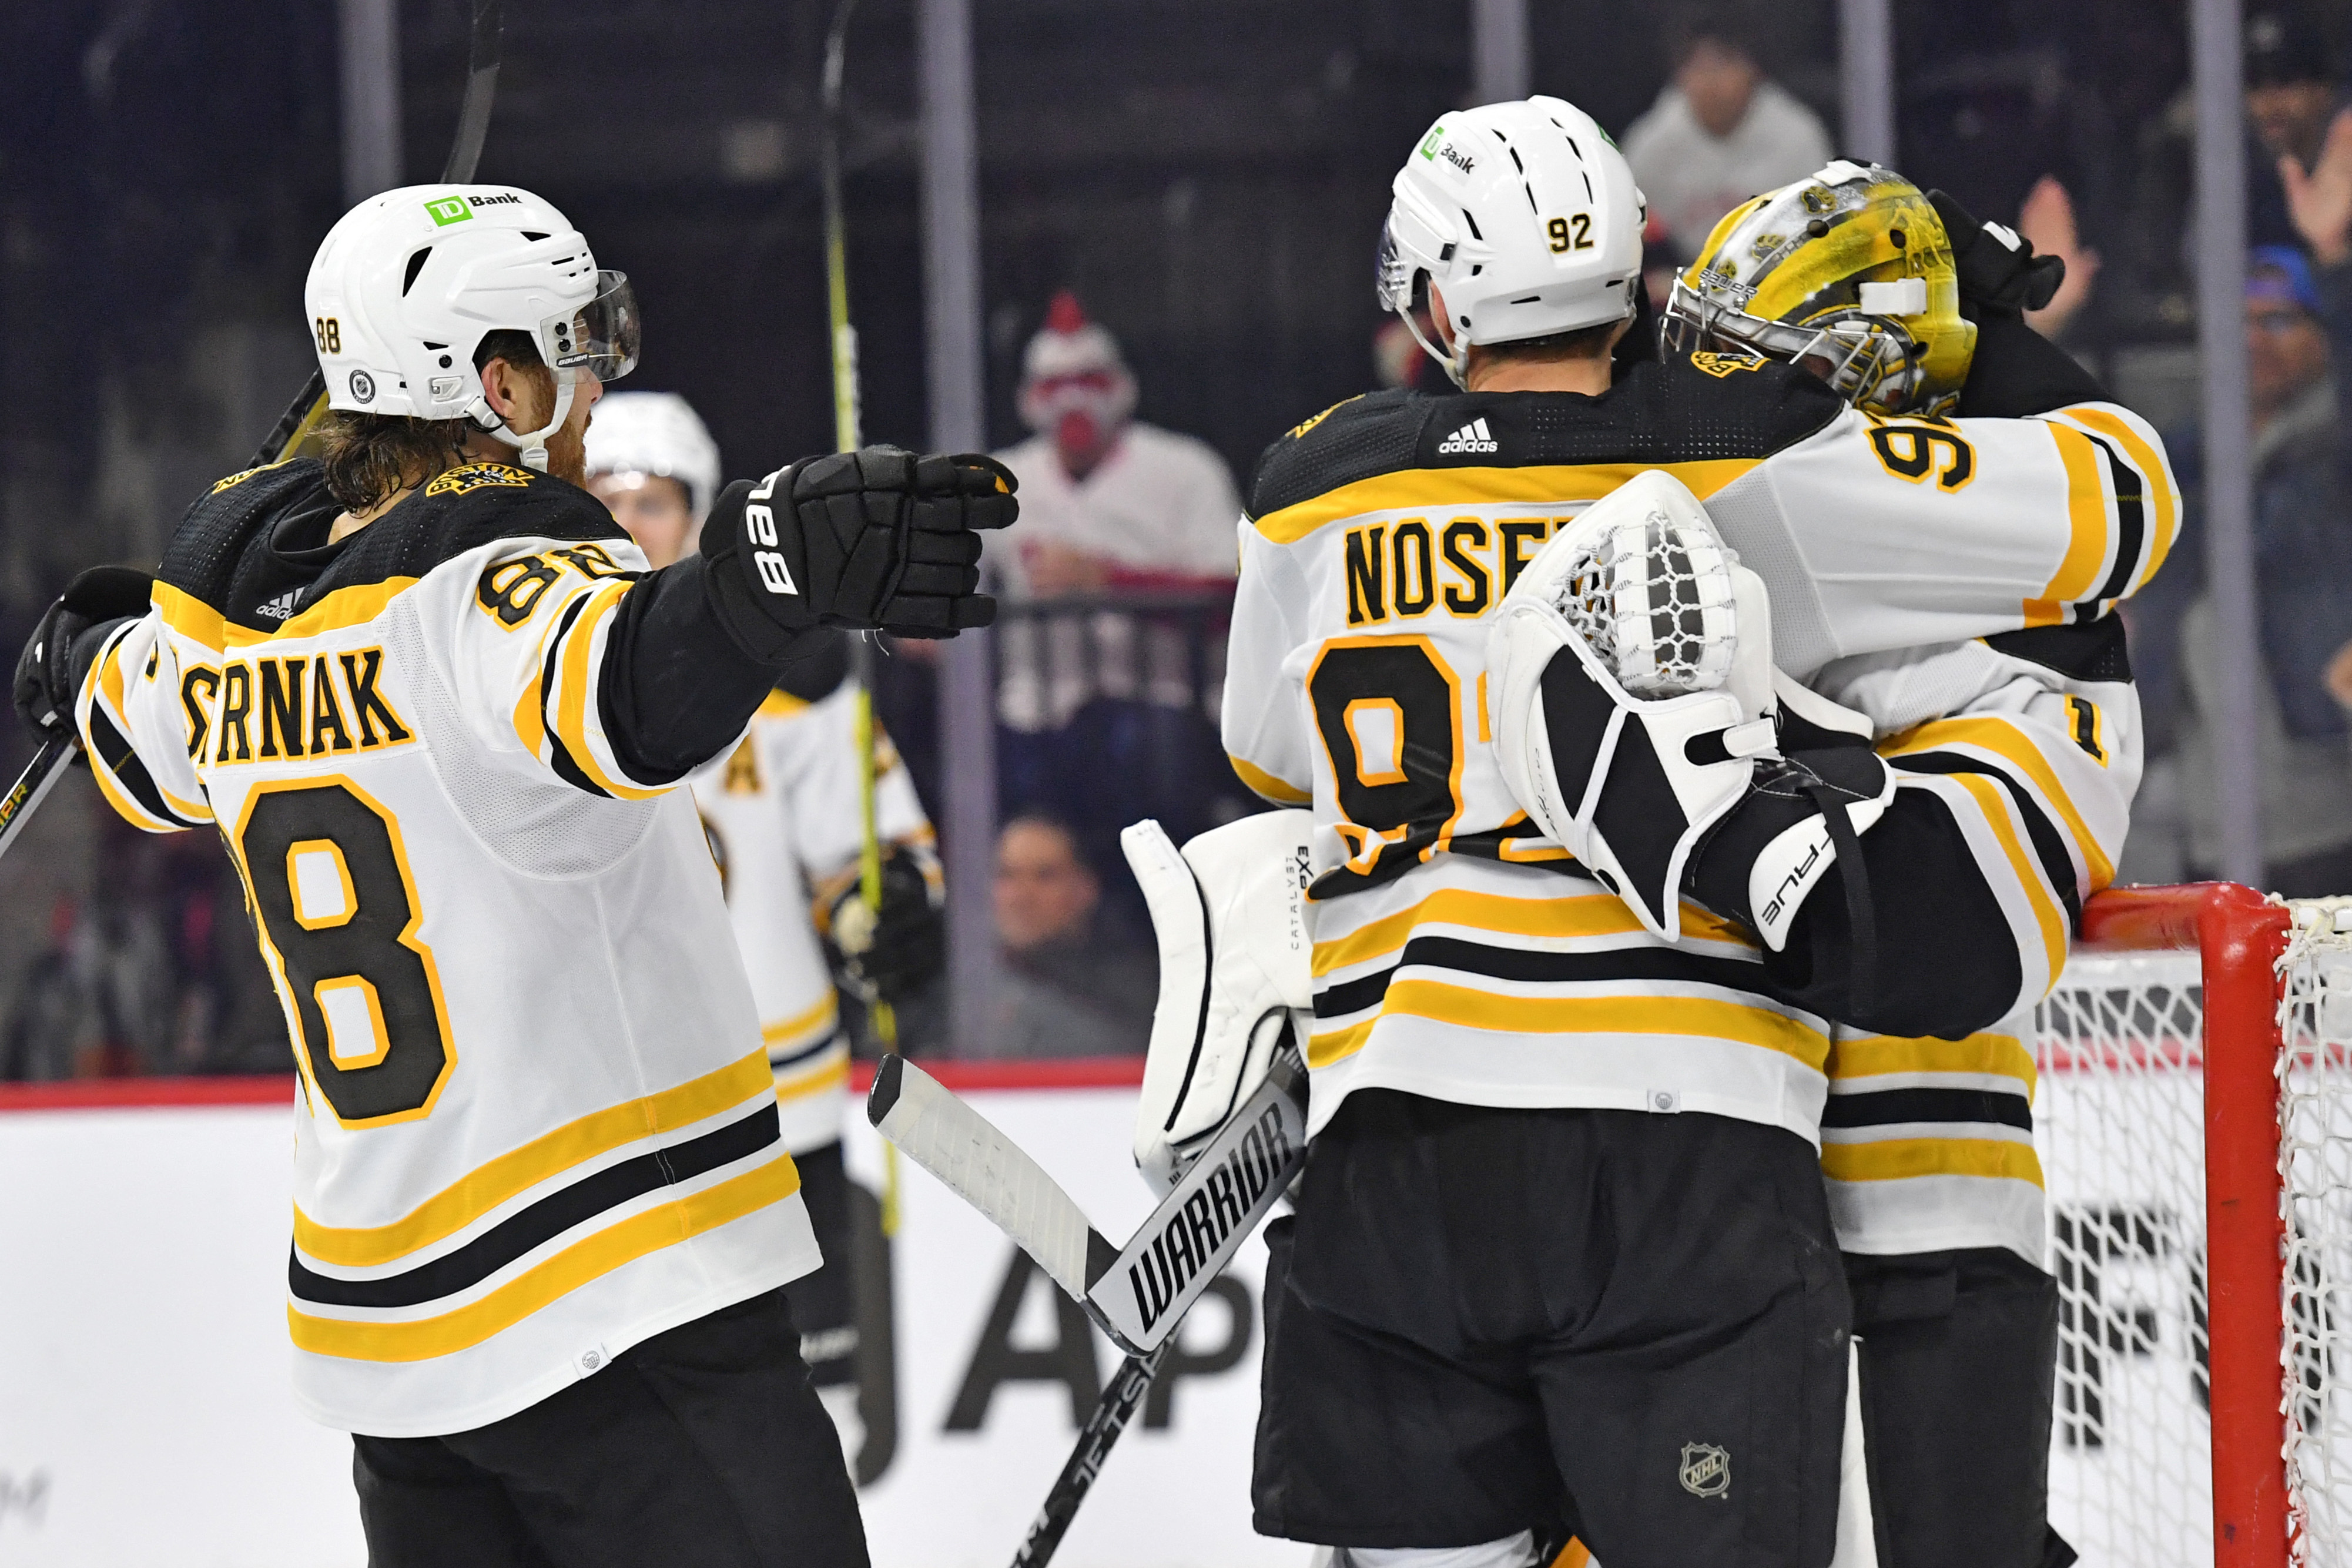 Bruins score 6 goals in rout of Flyers at TD Garden